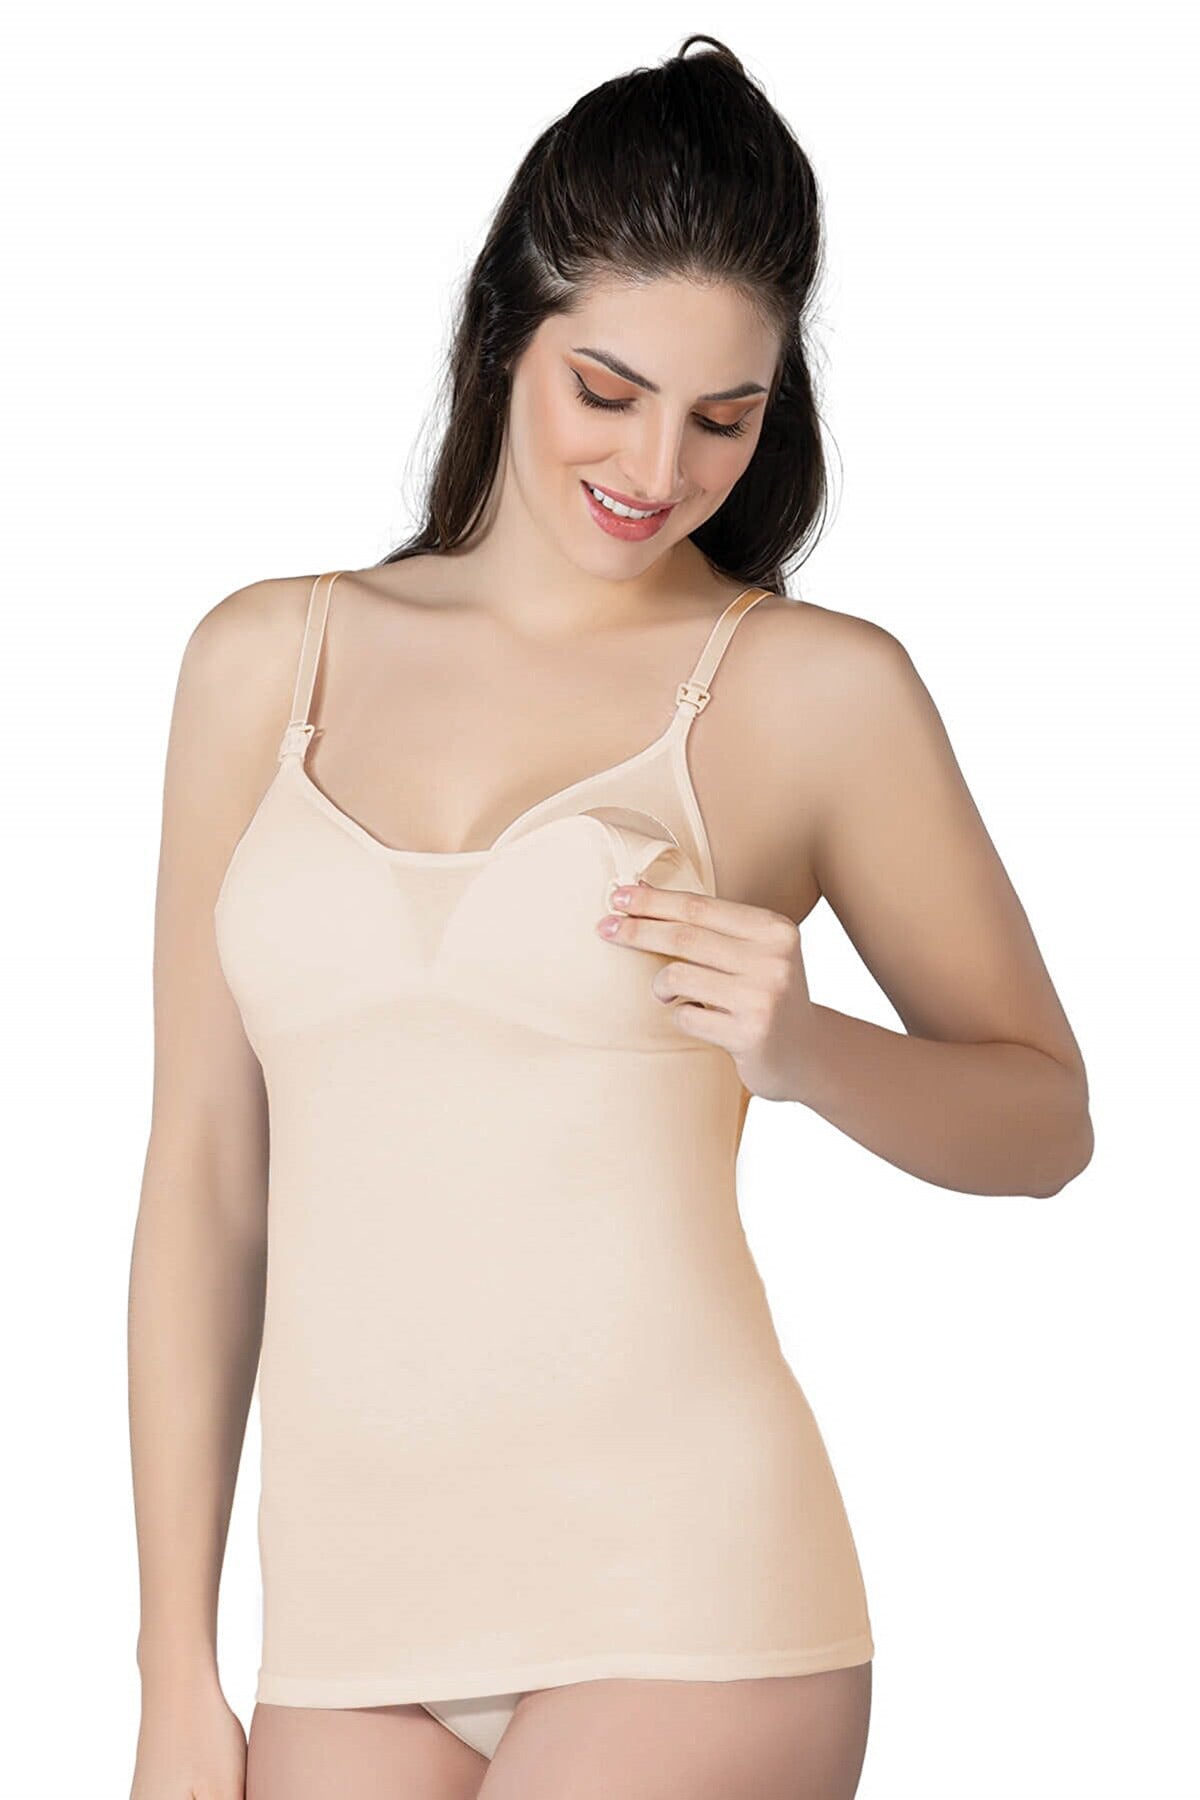 Covered With Modal Cotton Nursing Tank Top Skin - 1413